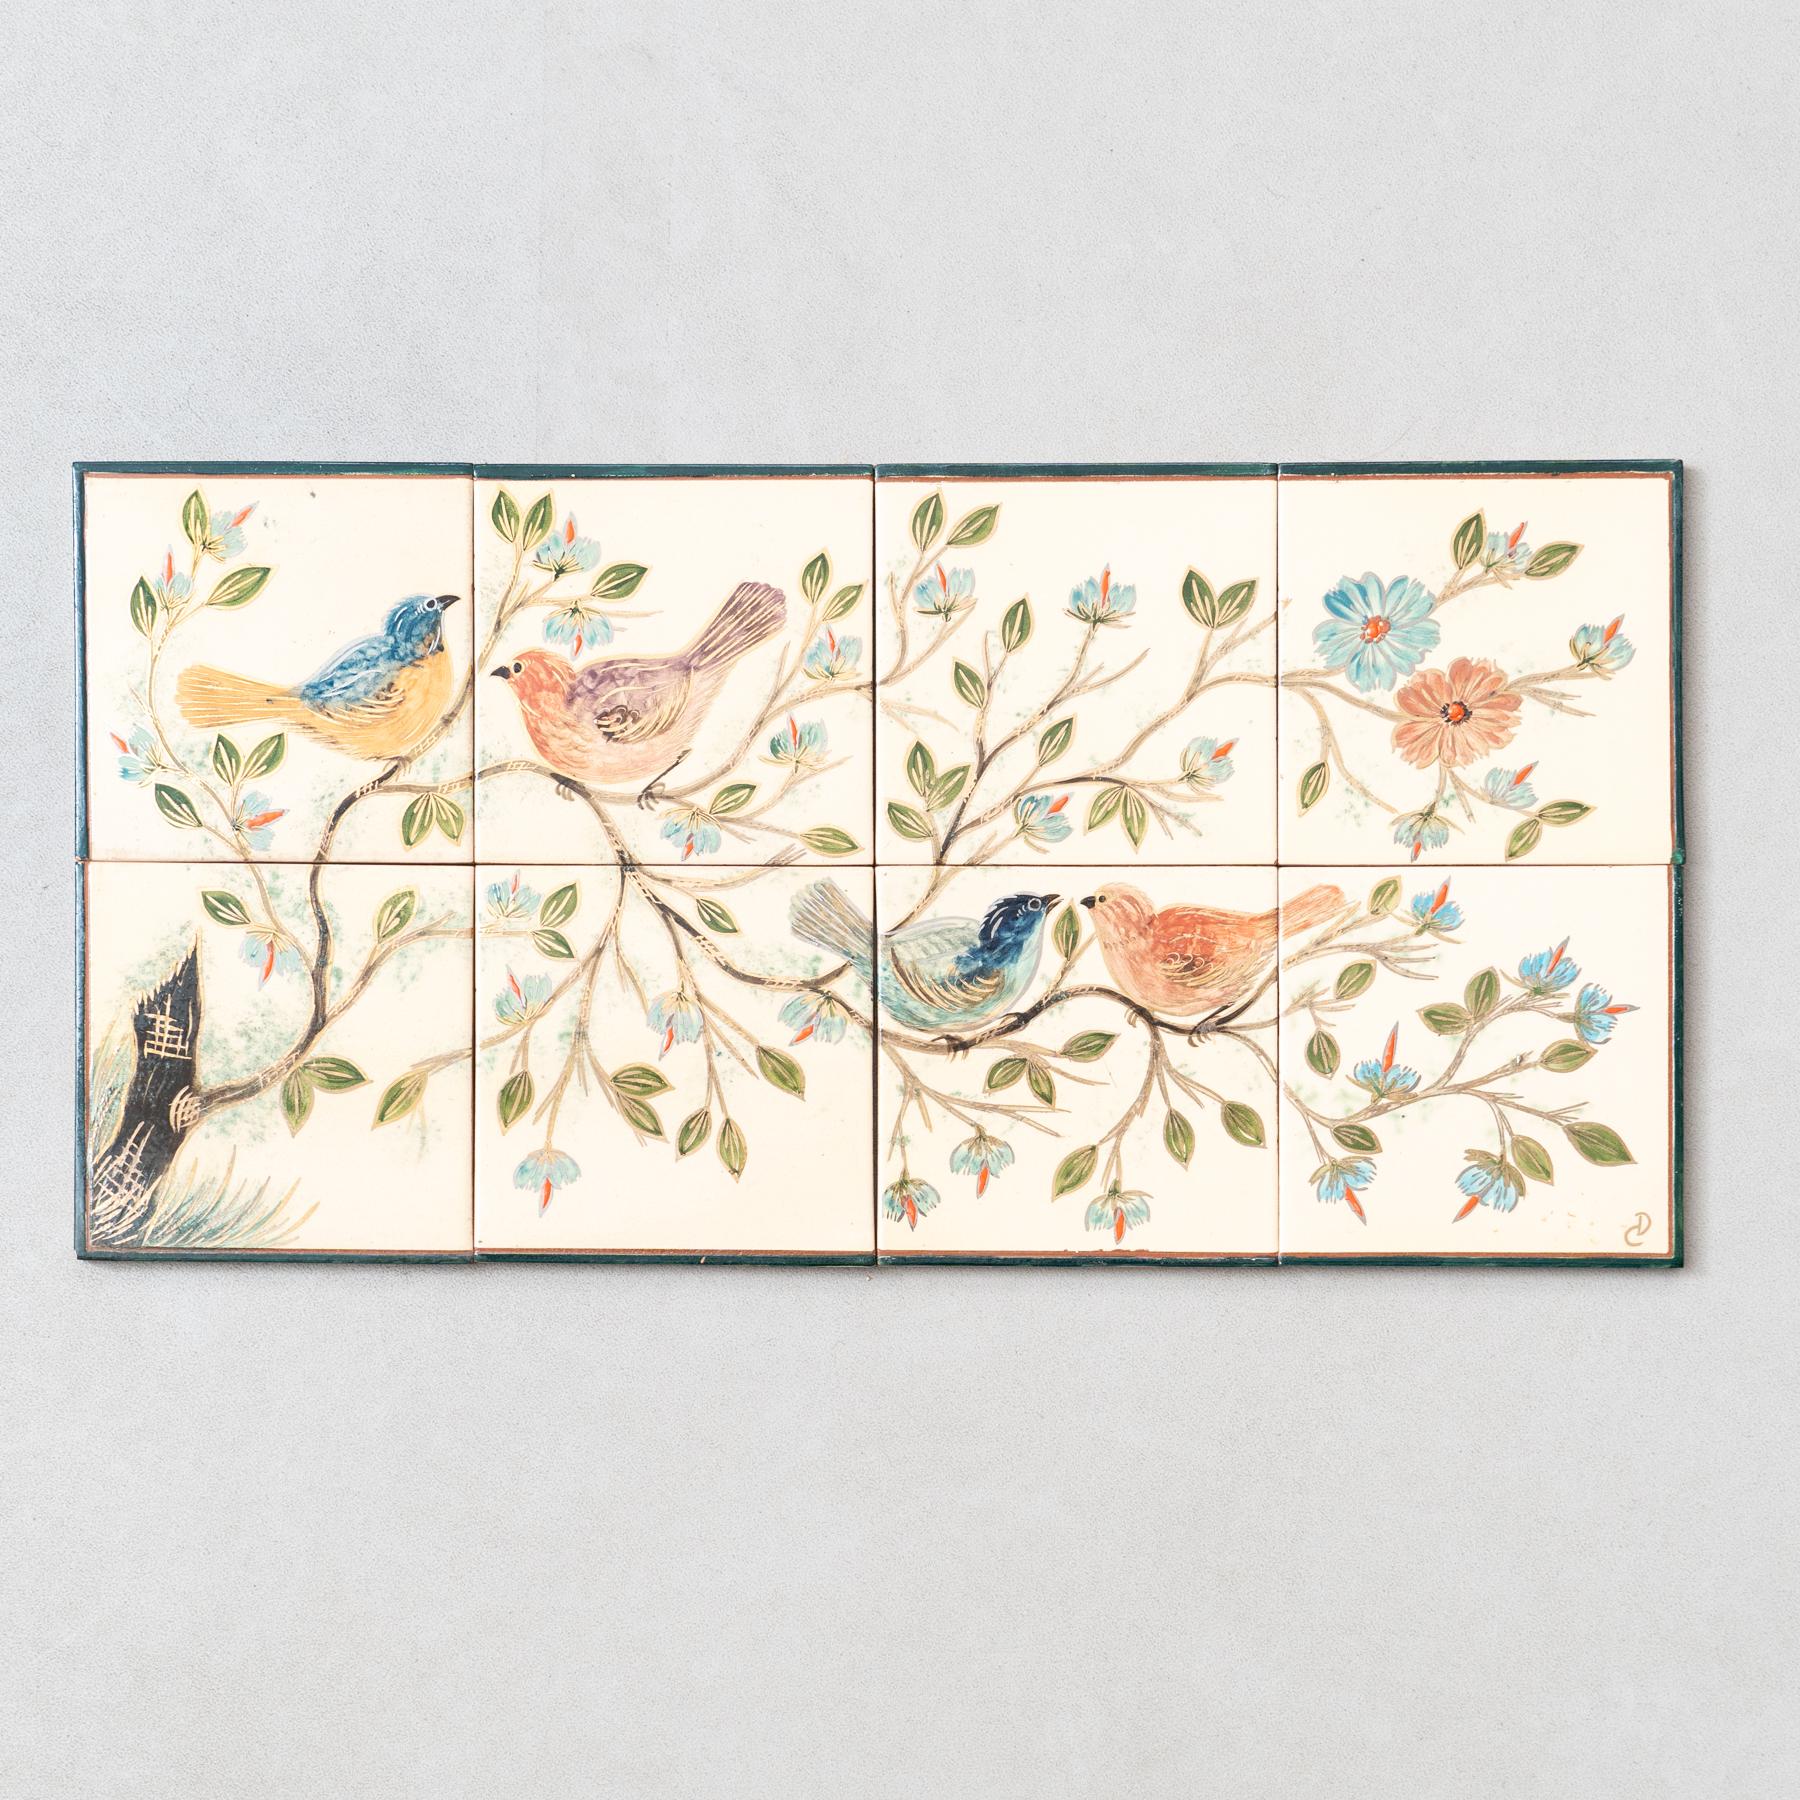 Ceramic hand painted large artwork of birds by Catalan artist Diaz Costa, circa 1960.
Framed. Signed.

In original condition, with minor wear consistent of age and use, preserving a beautiul patina.

Tiles come separated, not attached.